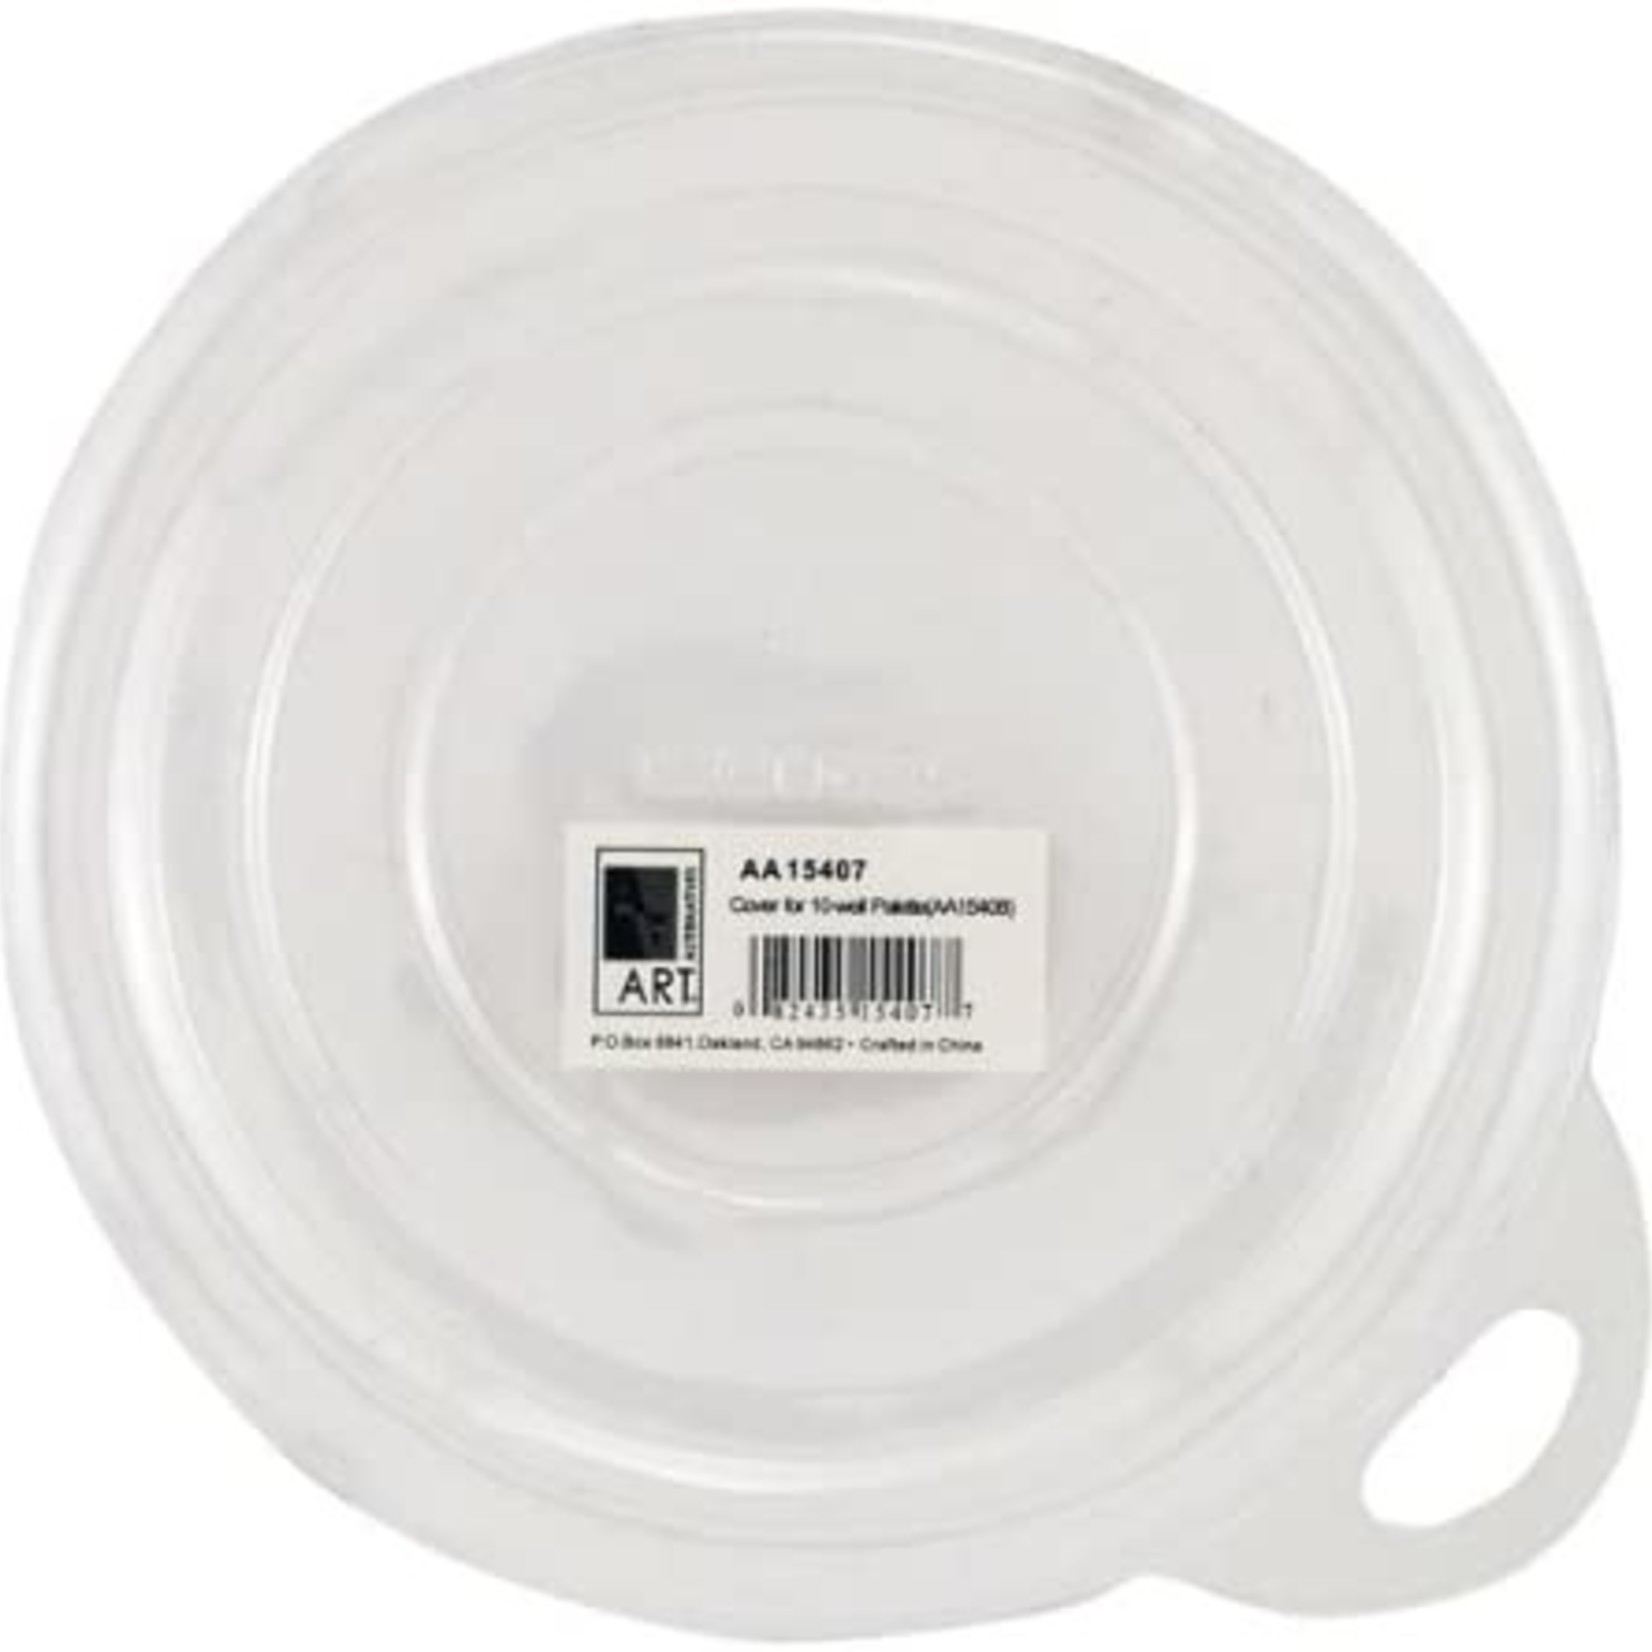 BULK - LIDS FOR ROUND PALETTES WITH 10 WELLS 12/PK